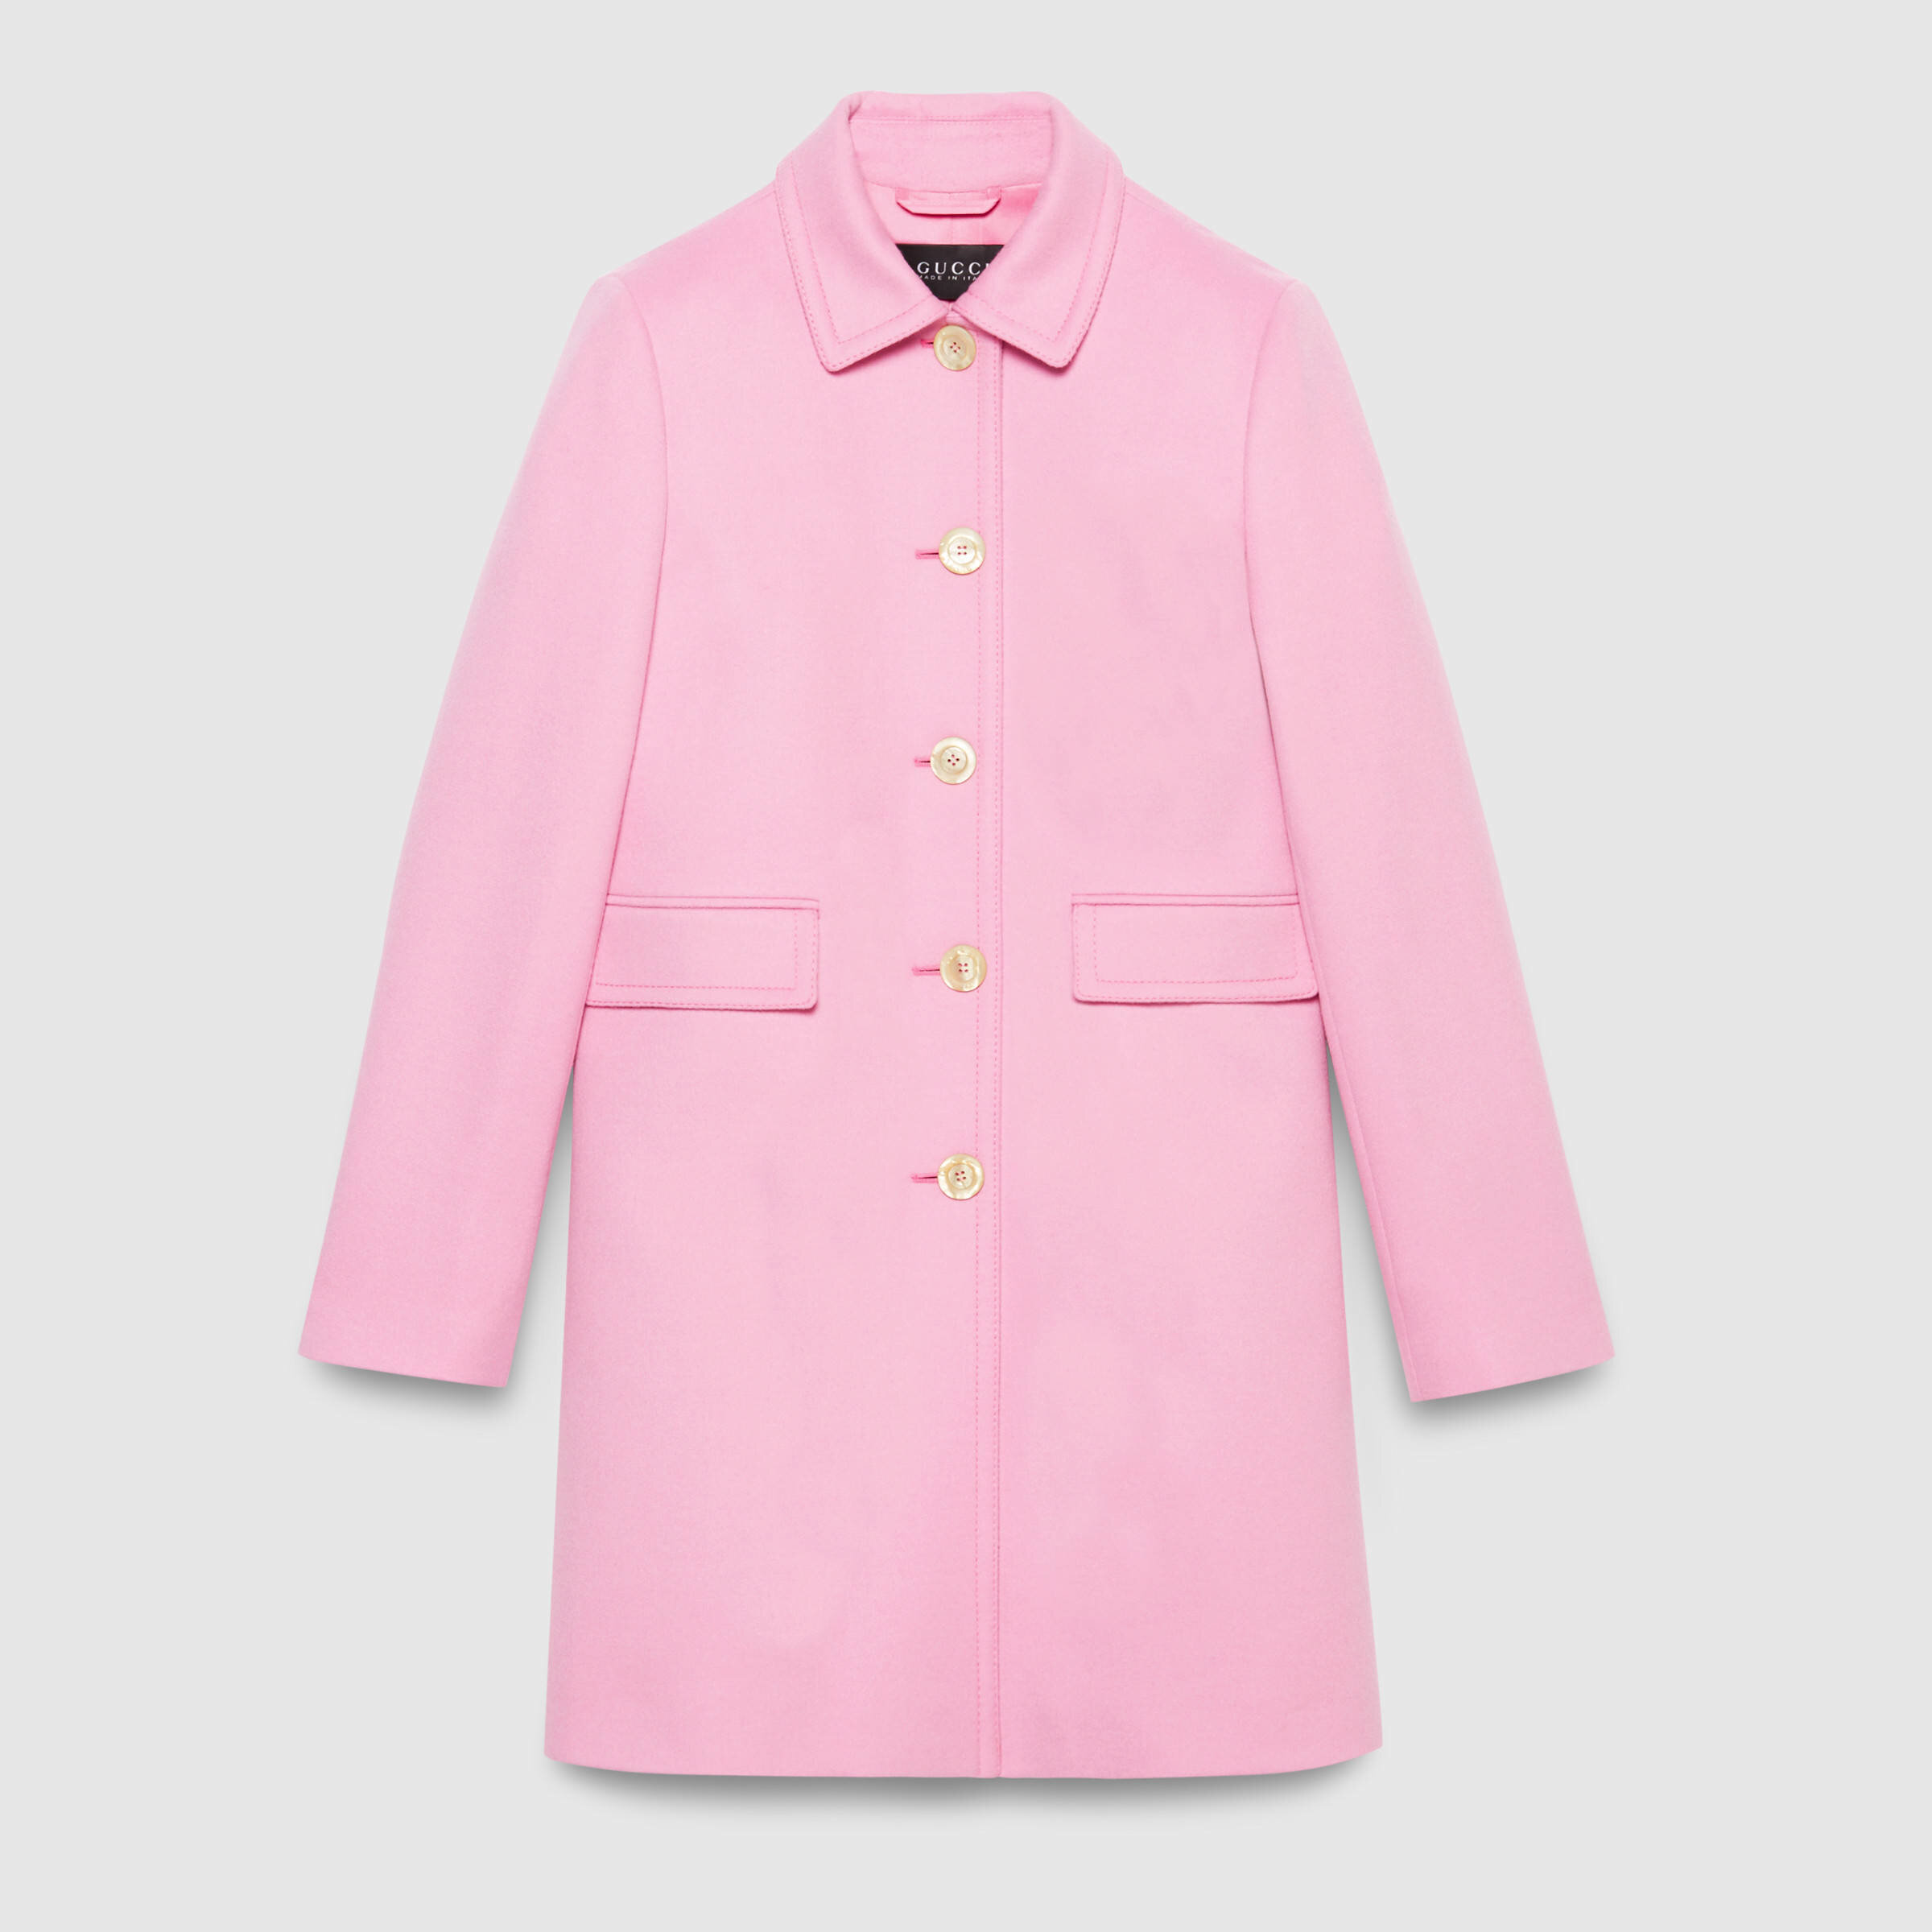 Gucci Single-Breasted Wool Coat in Pink.jpg